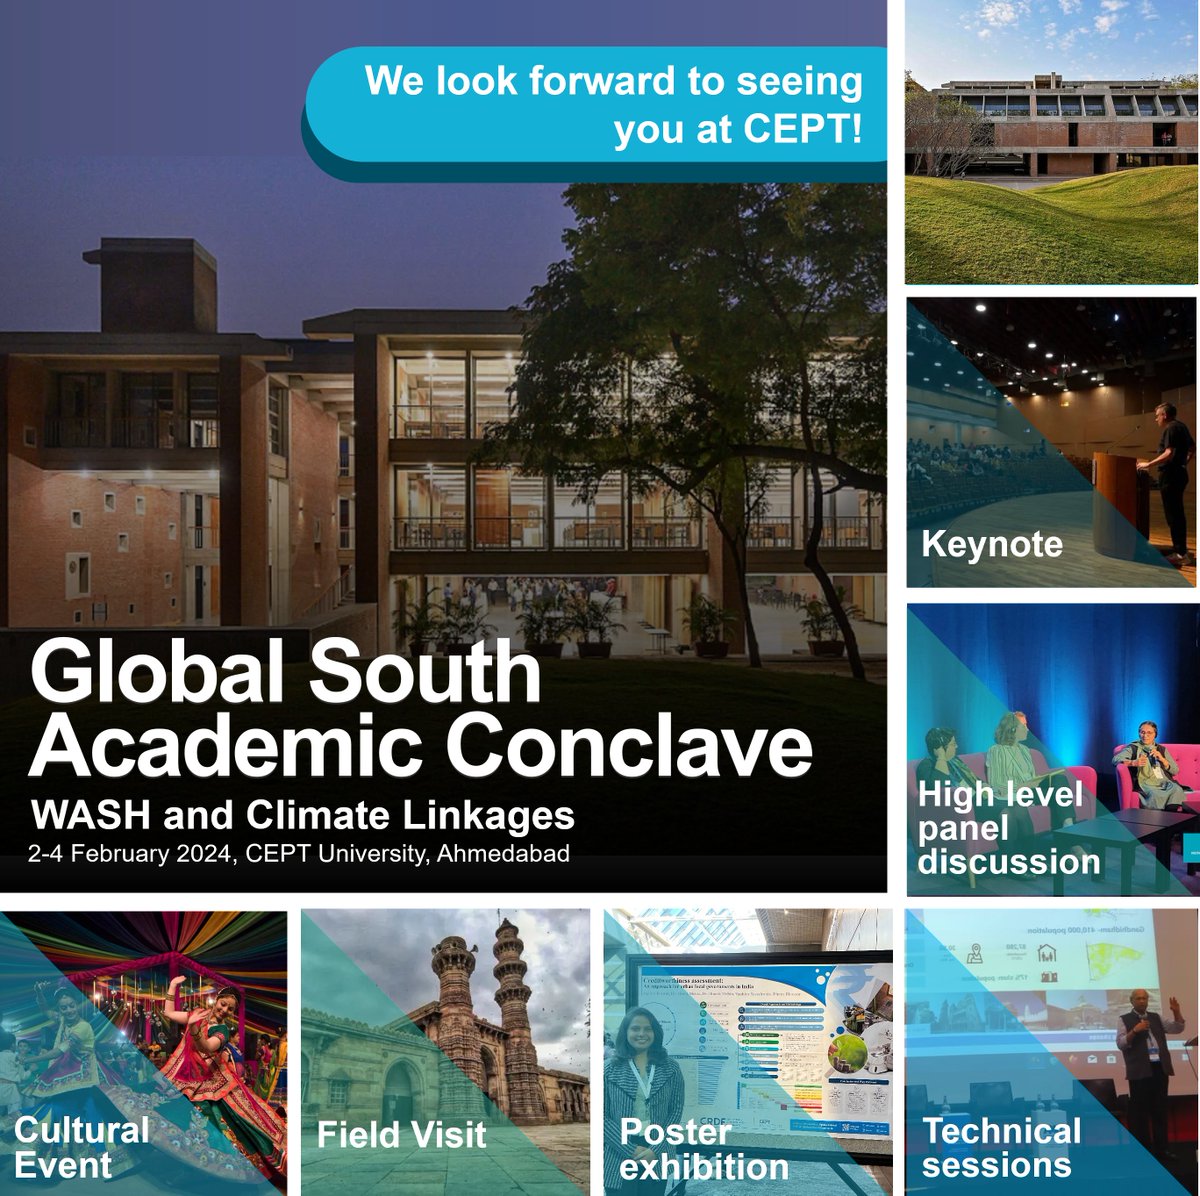 2 Days to go! Join us at the Global South Academic Conclave for interesting discussions on WASH and Climate linkages at @CEPTUniversity1, Ahmedabad from 2-4 Feb, 2024. @mehta_pani @DineshMehta100 @CeptResearch @CEPTUniversity1 @fpcept @BMGFIndia